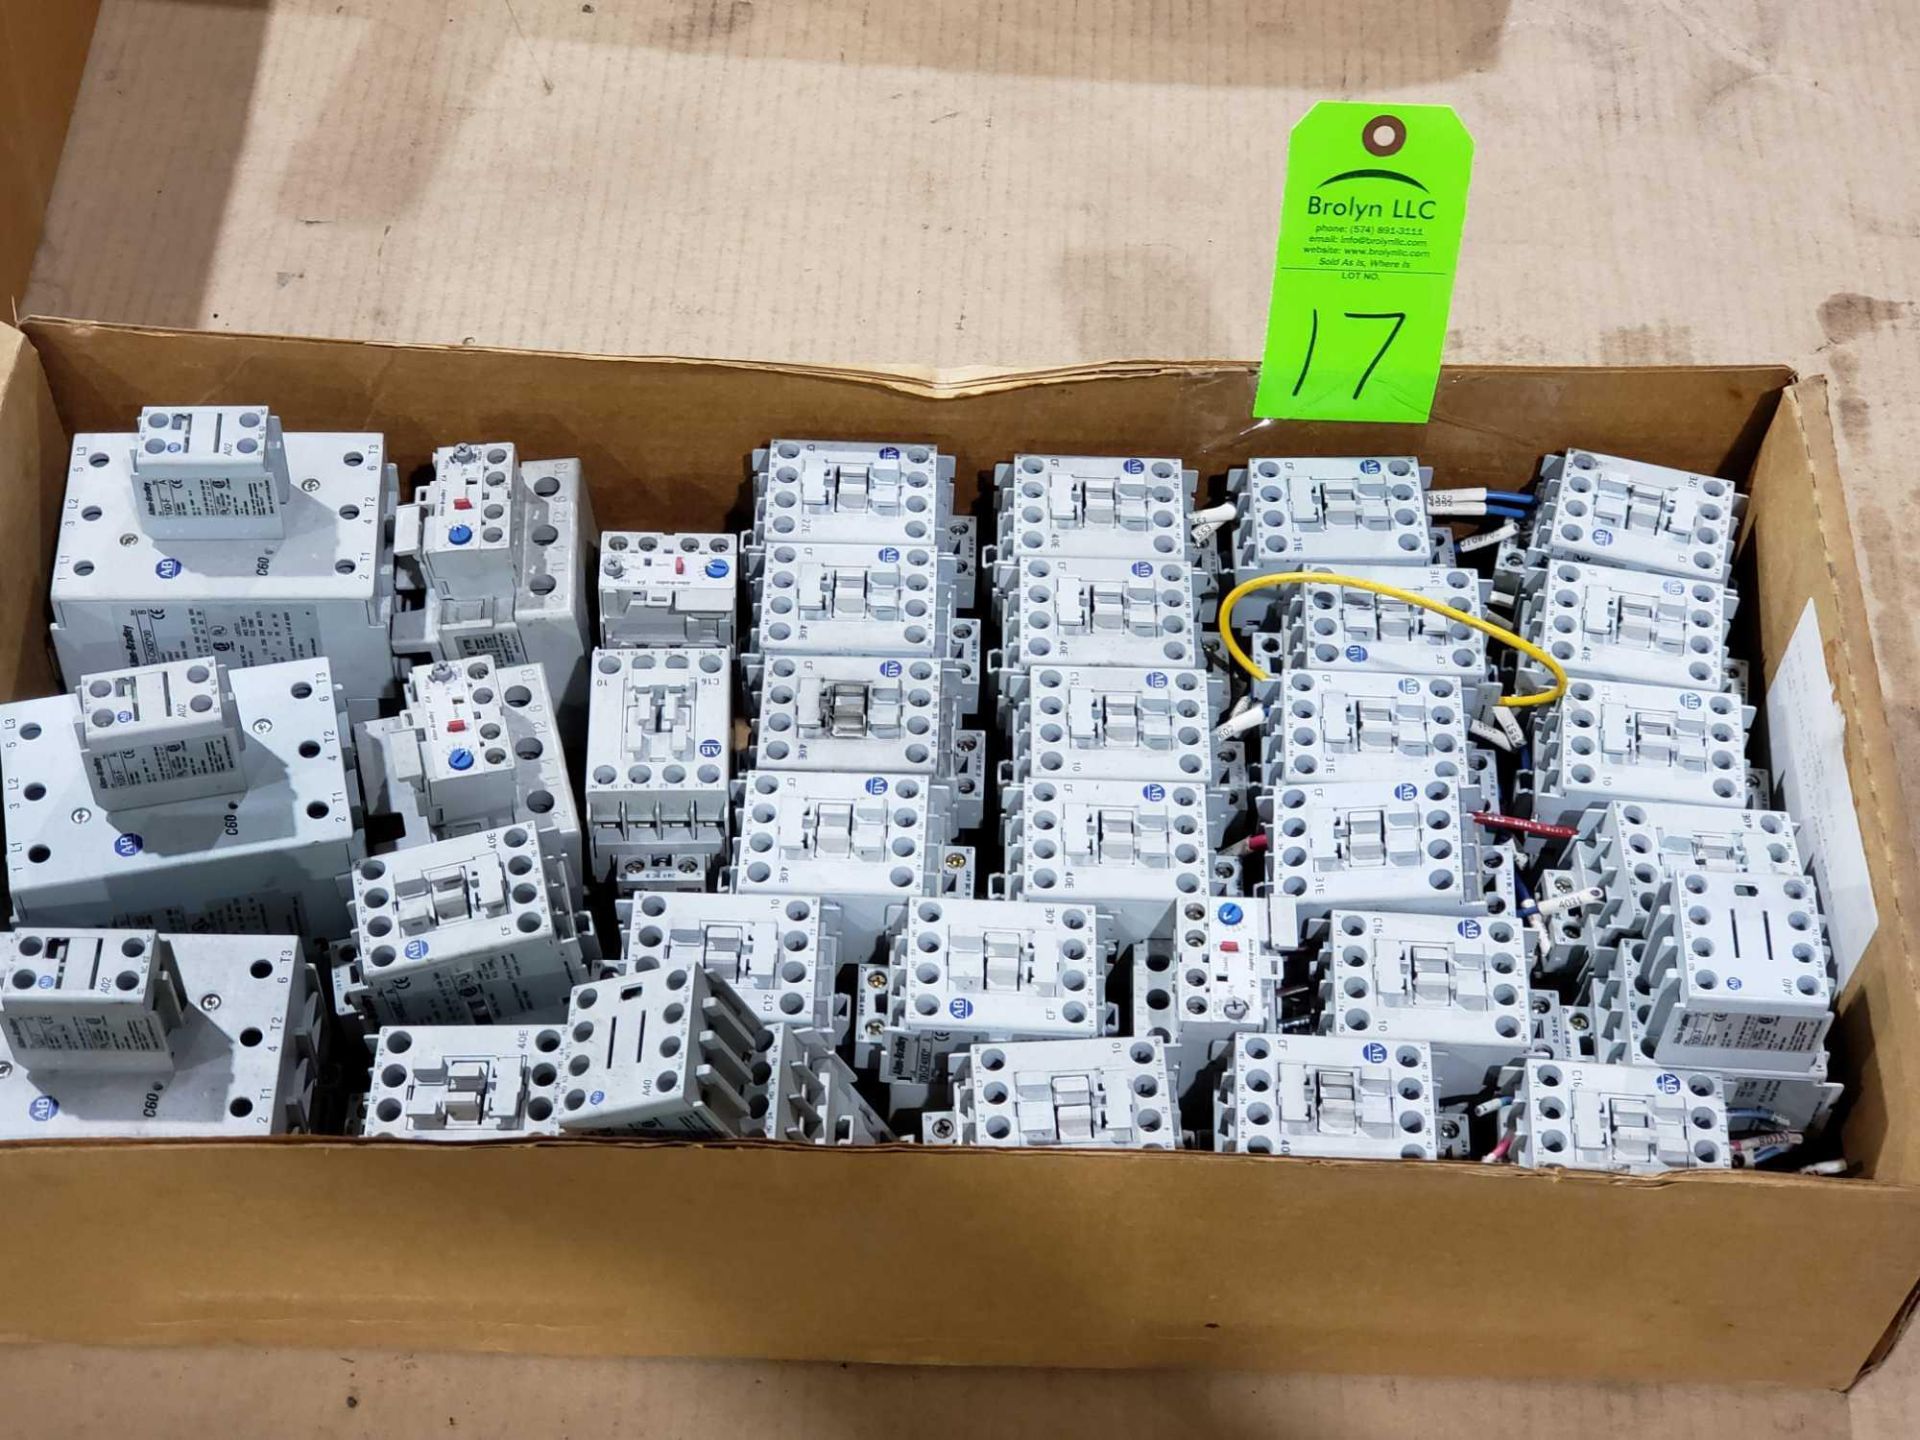 Large Qty of Allen Bradley Contactors in assorted sizes and part numbers.